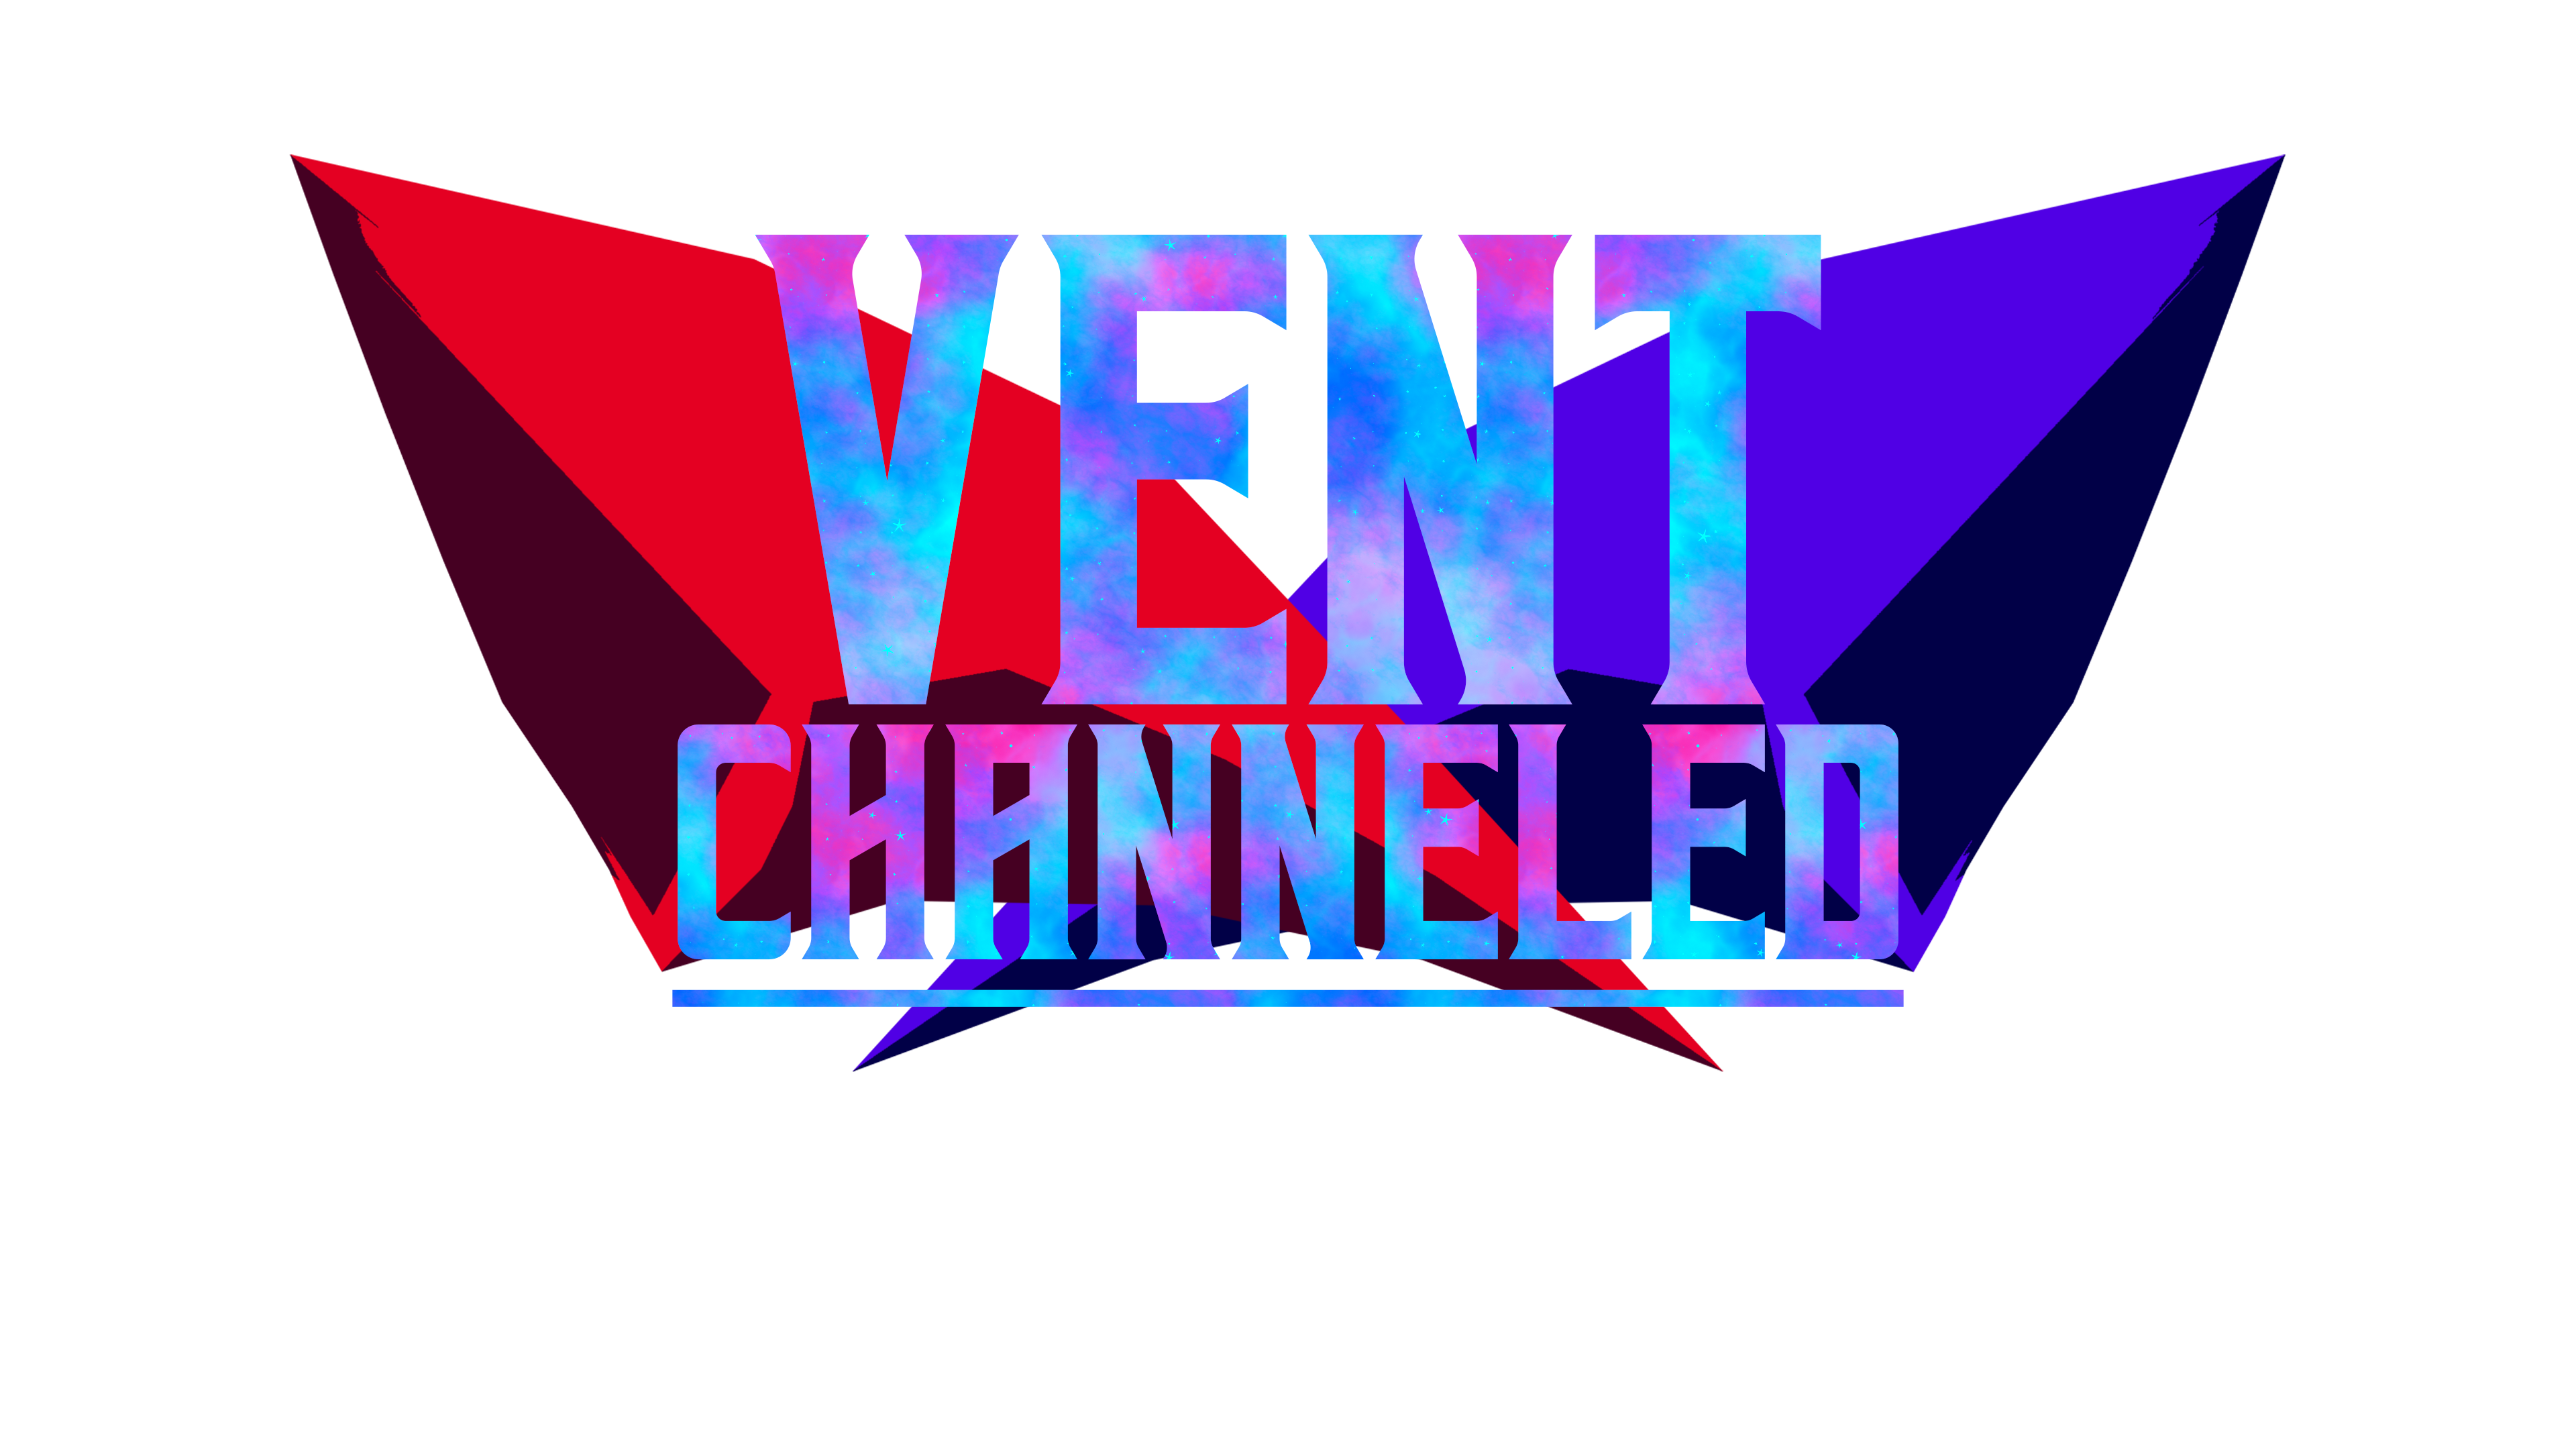 Vent Channeled